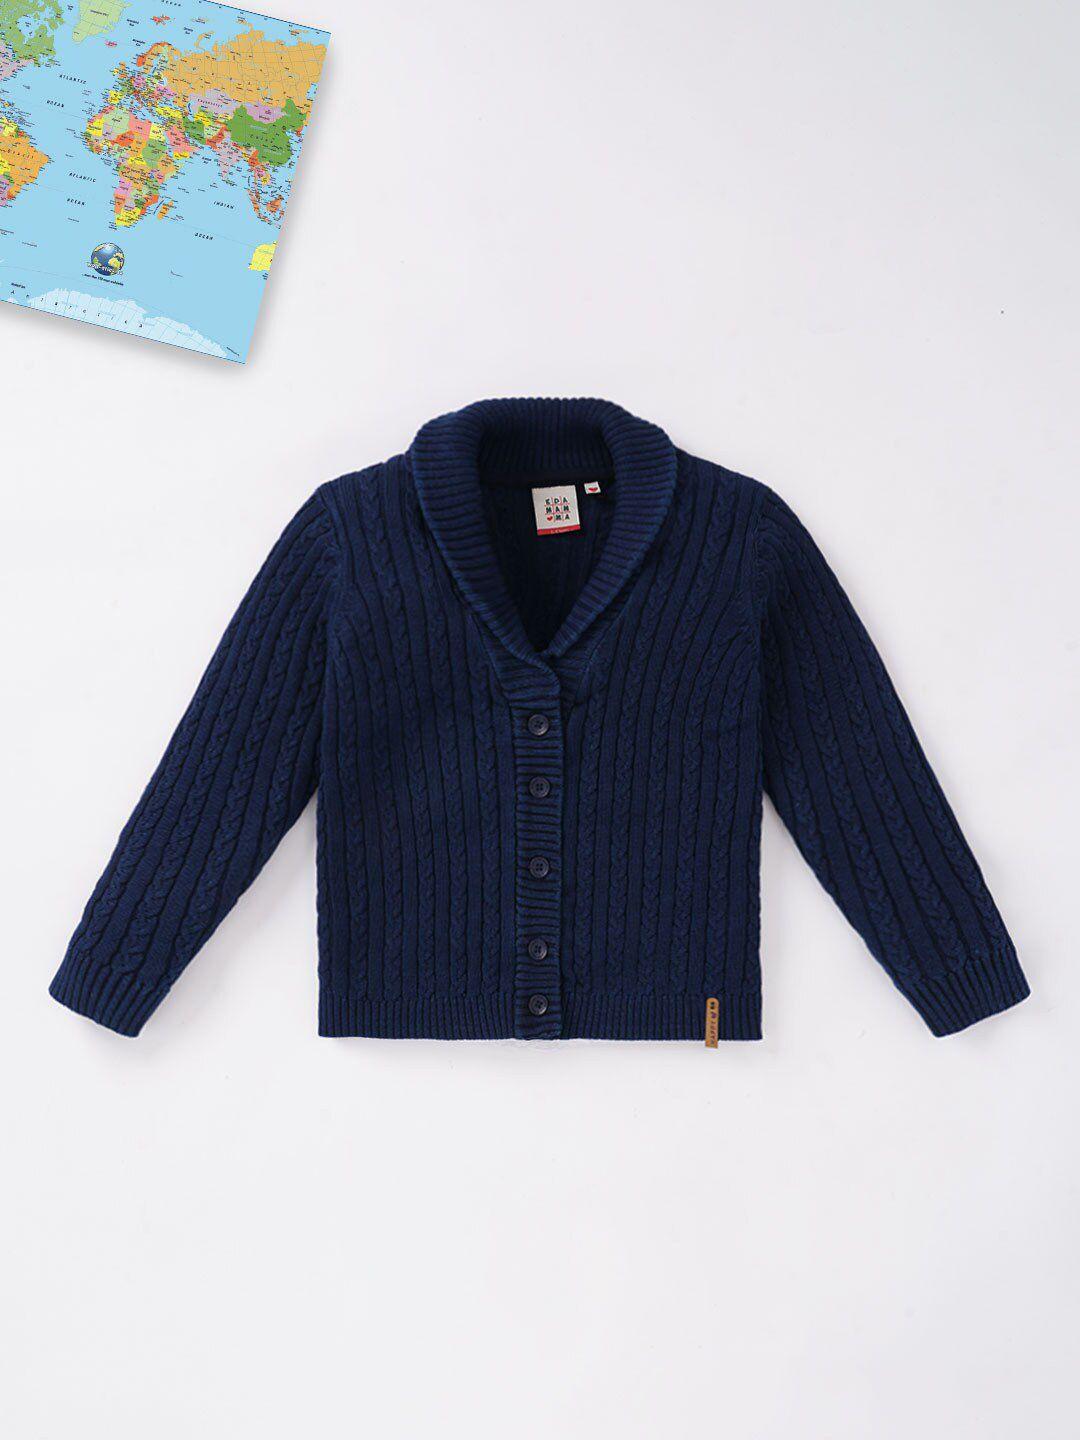 ed-a-mamma boys navy blue striped sustainable cardigan sweater